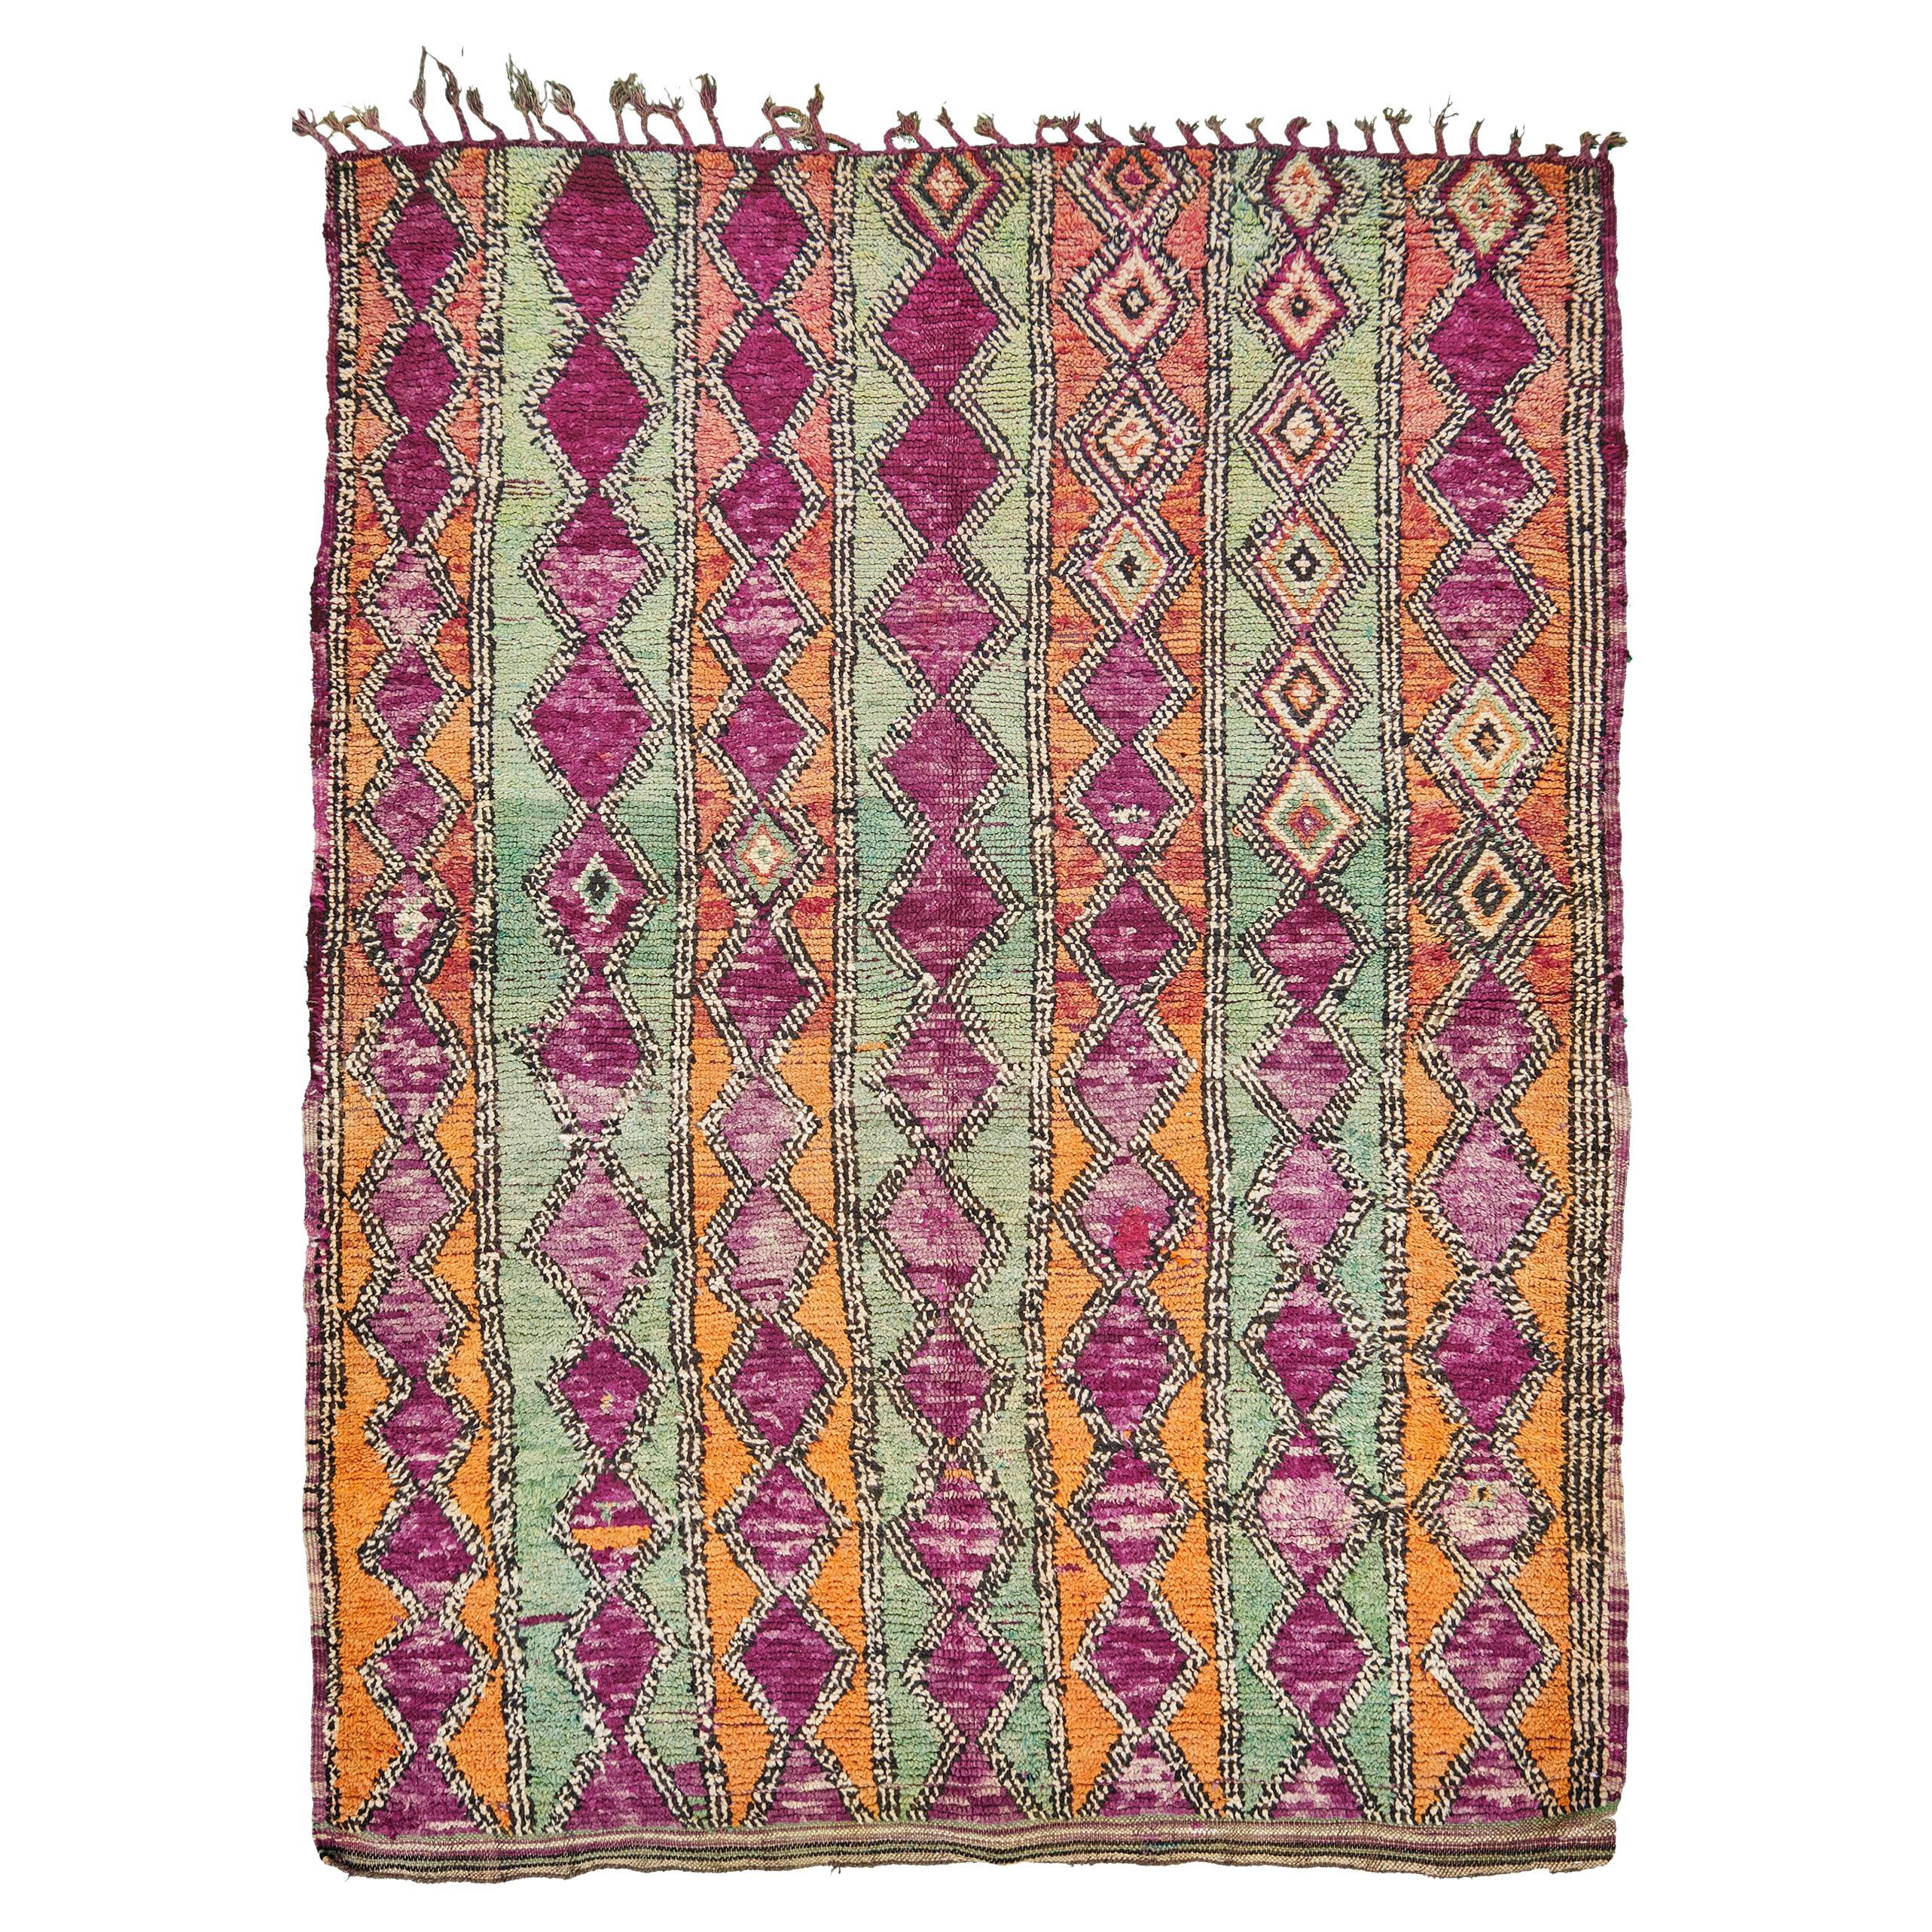 Vintage Moroccan Beni Ourain Tribe Rug by Mehraban Rugs